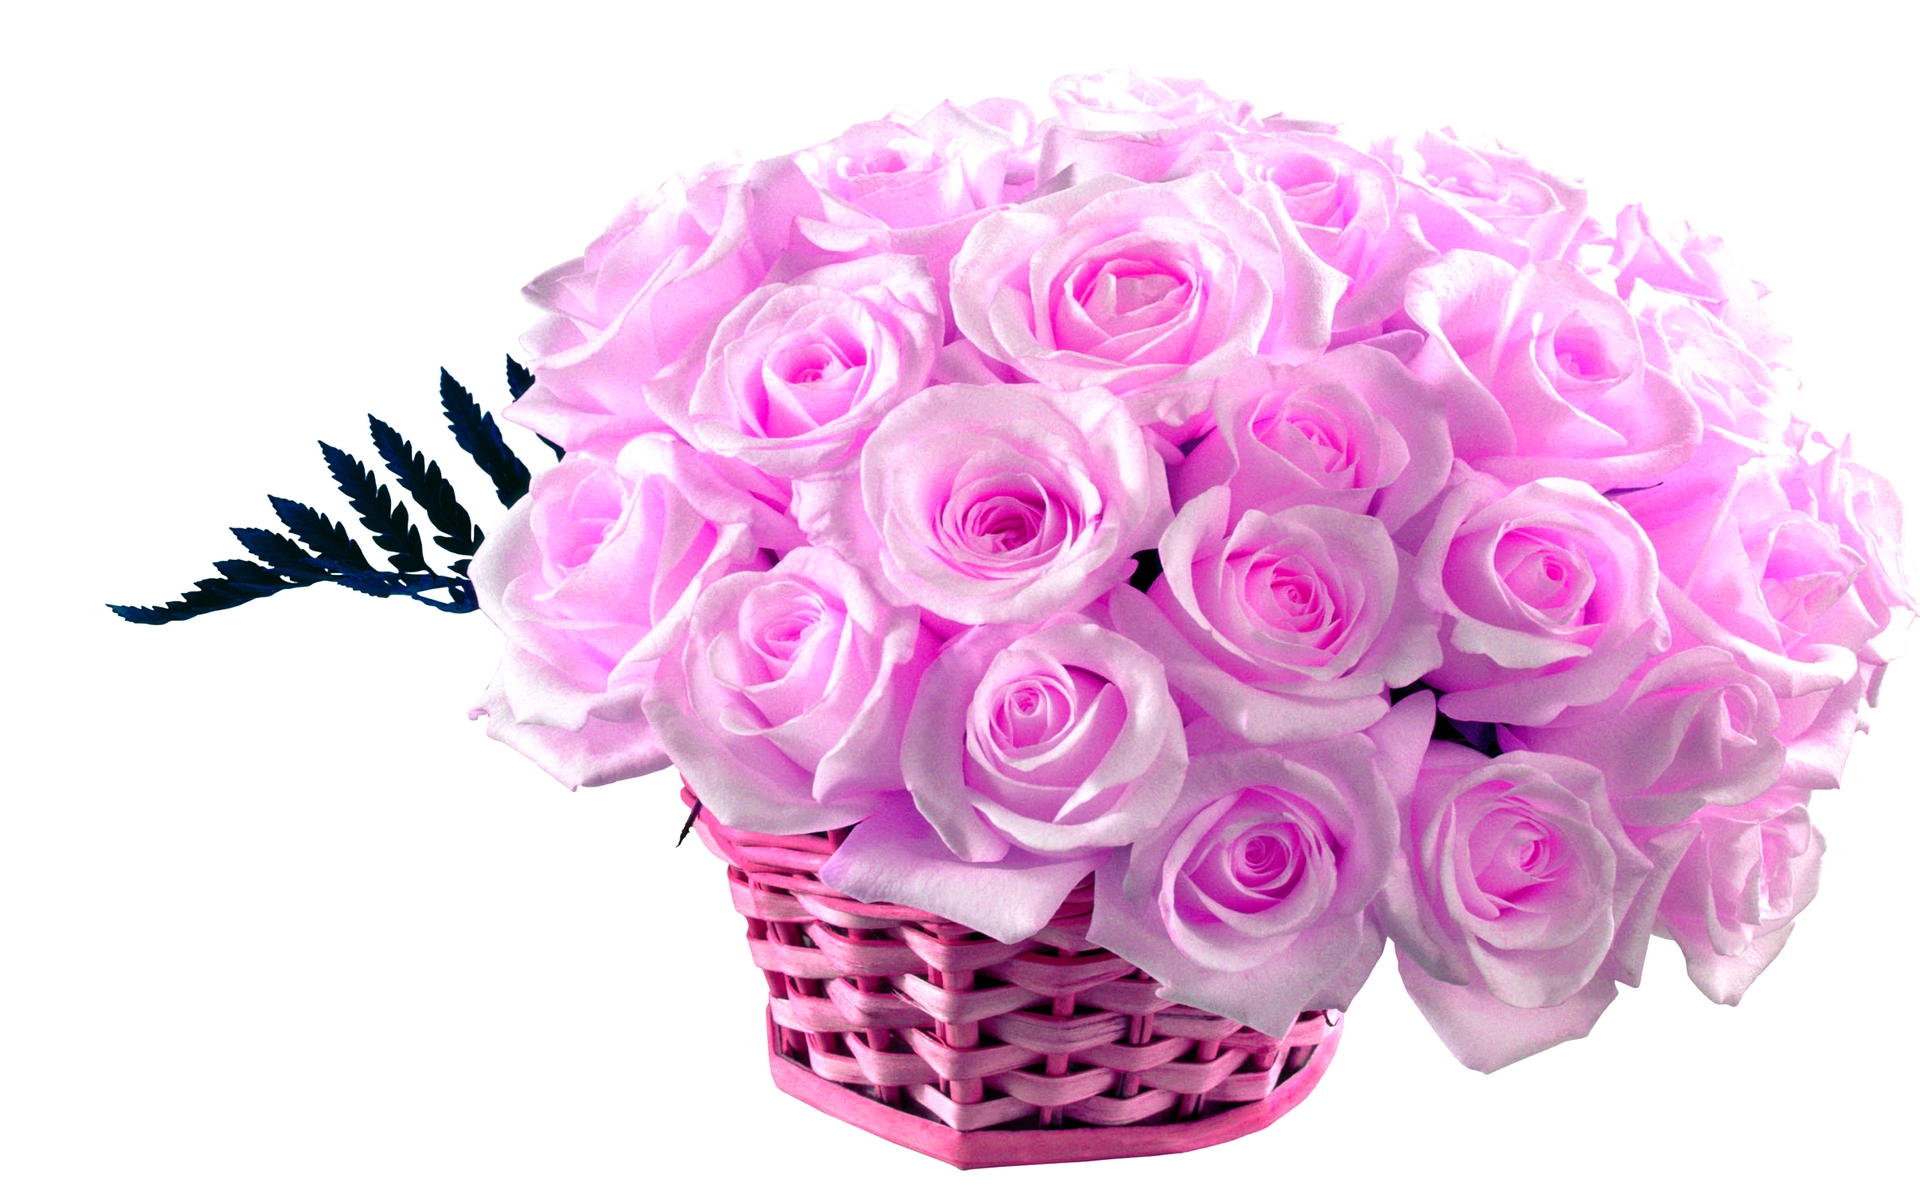 Pink Roses Images Group with 42 items